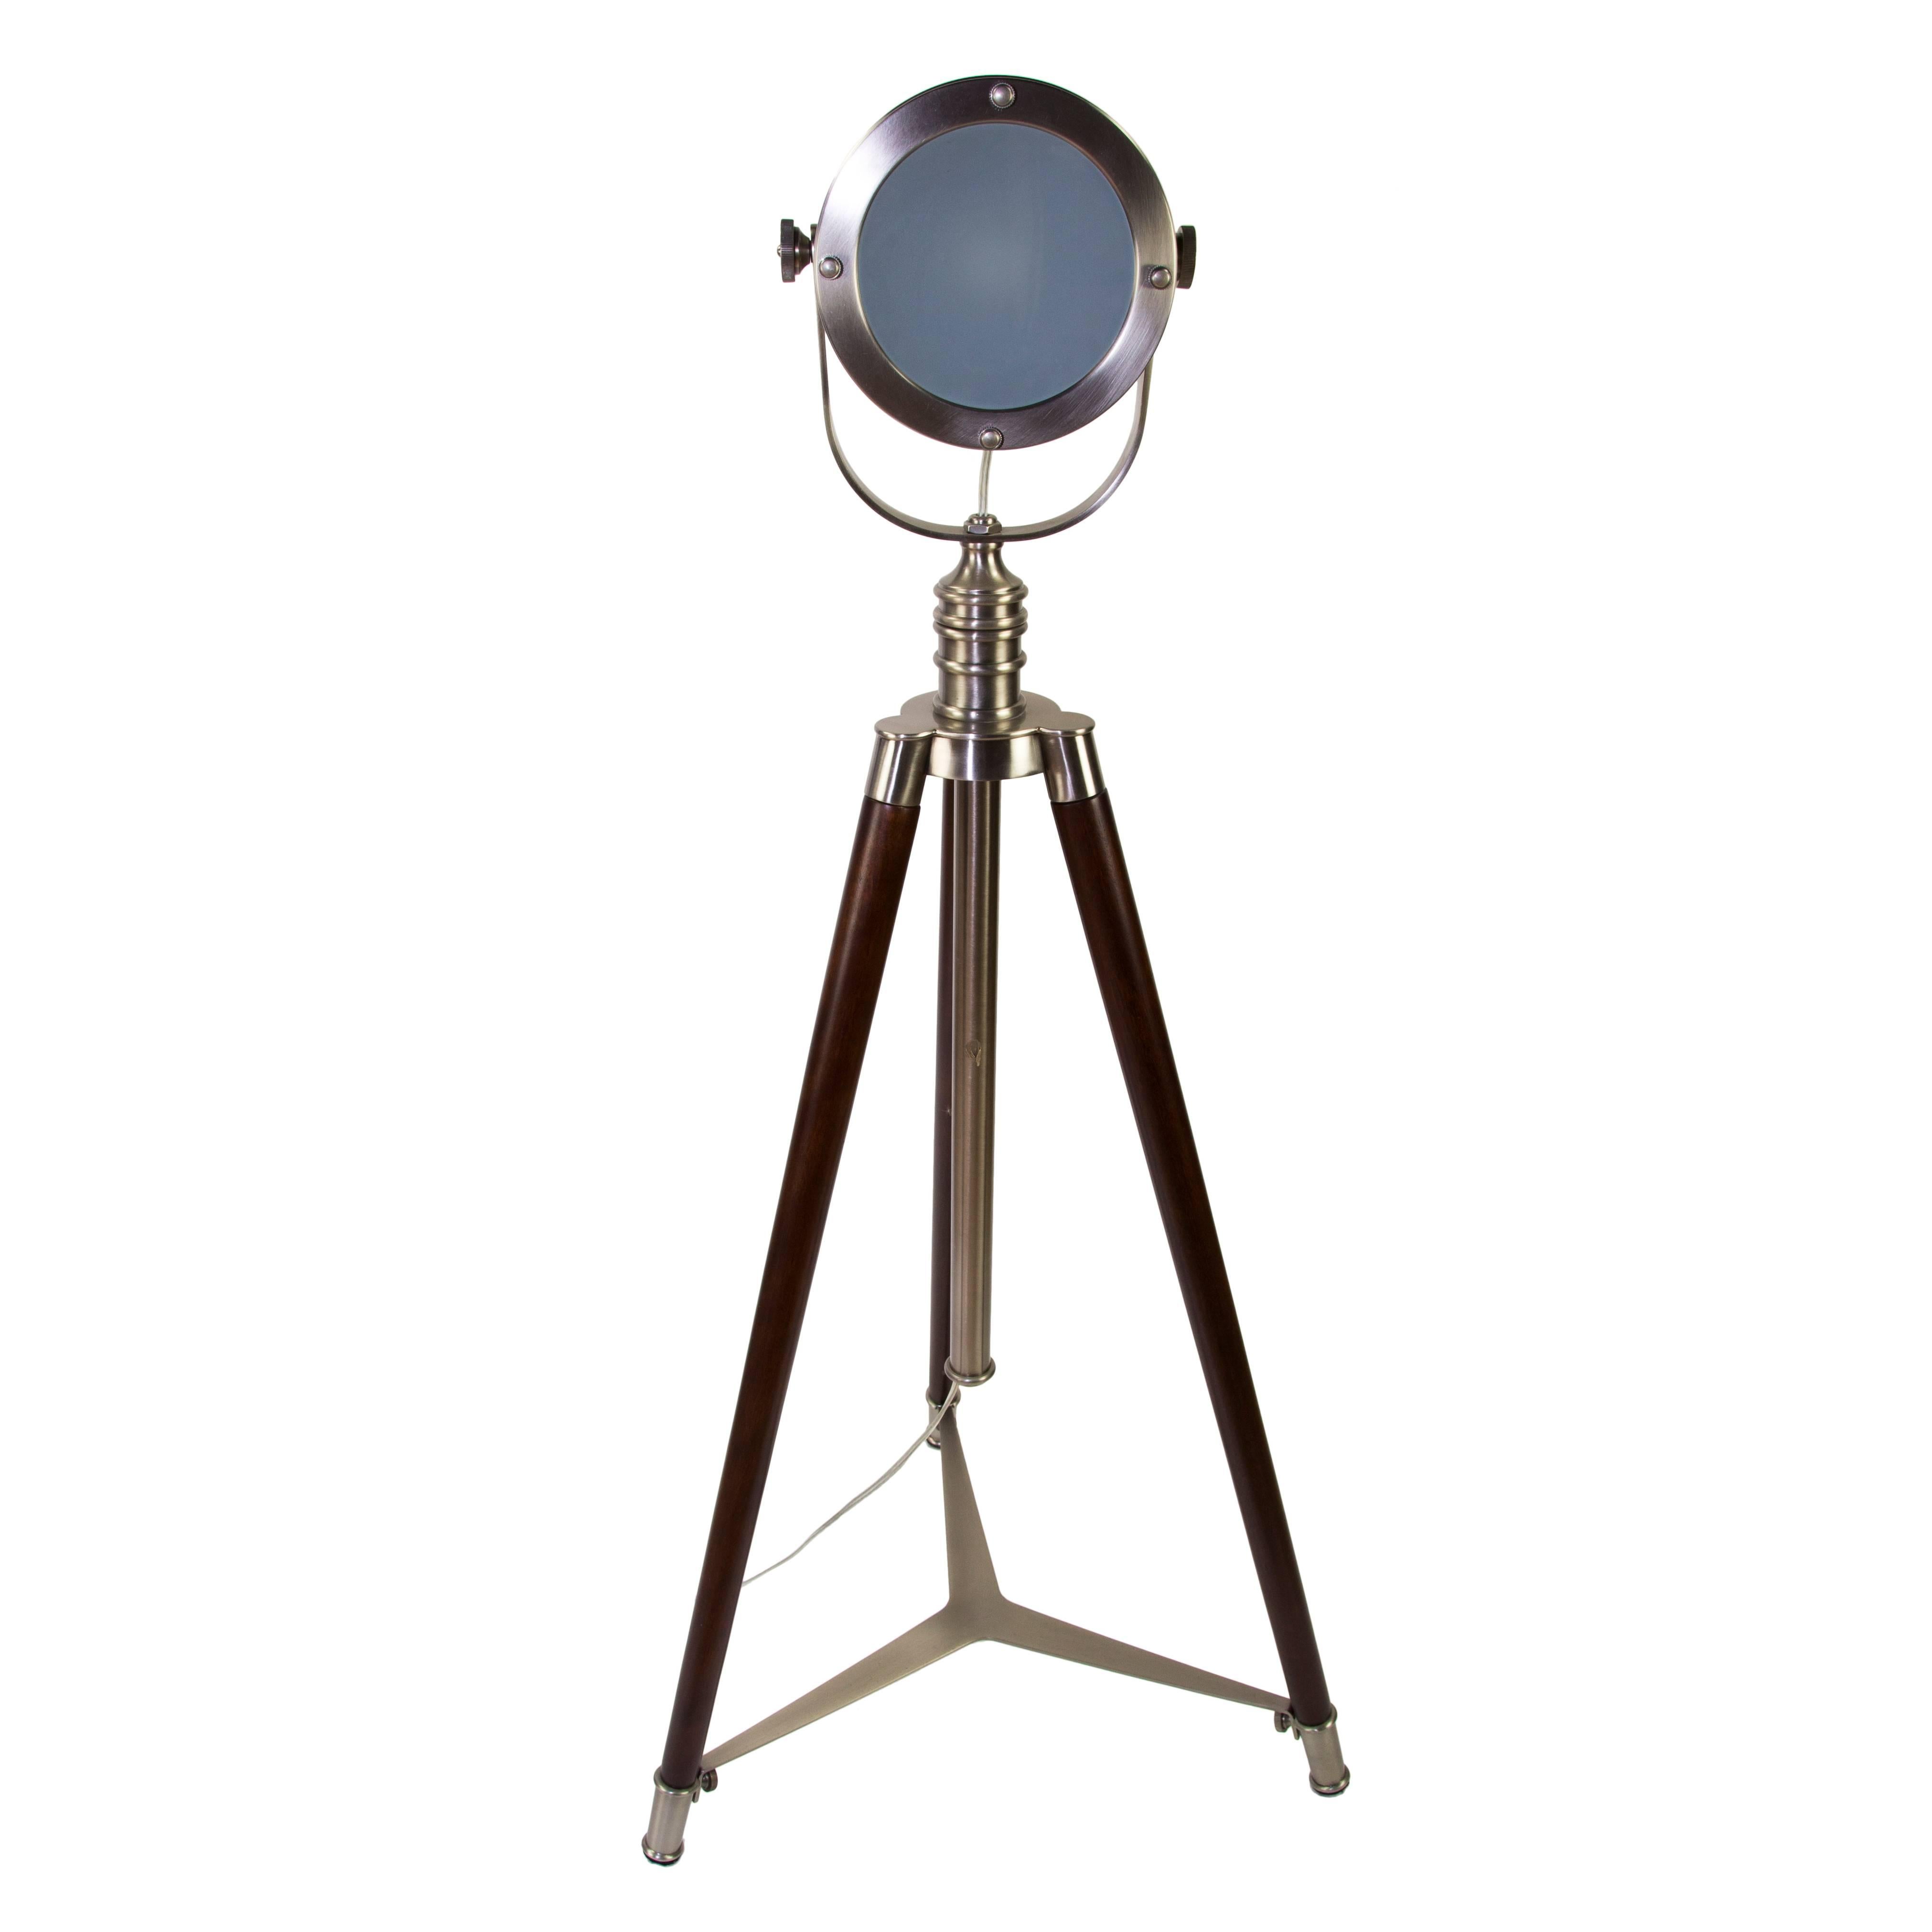 Get the trending Industrial look in the comfort of your home and office! This large spotlight floor lamp fits well in every corner of the room and works great over your favorite reading chair; not only attractive but also practical in adding low